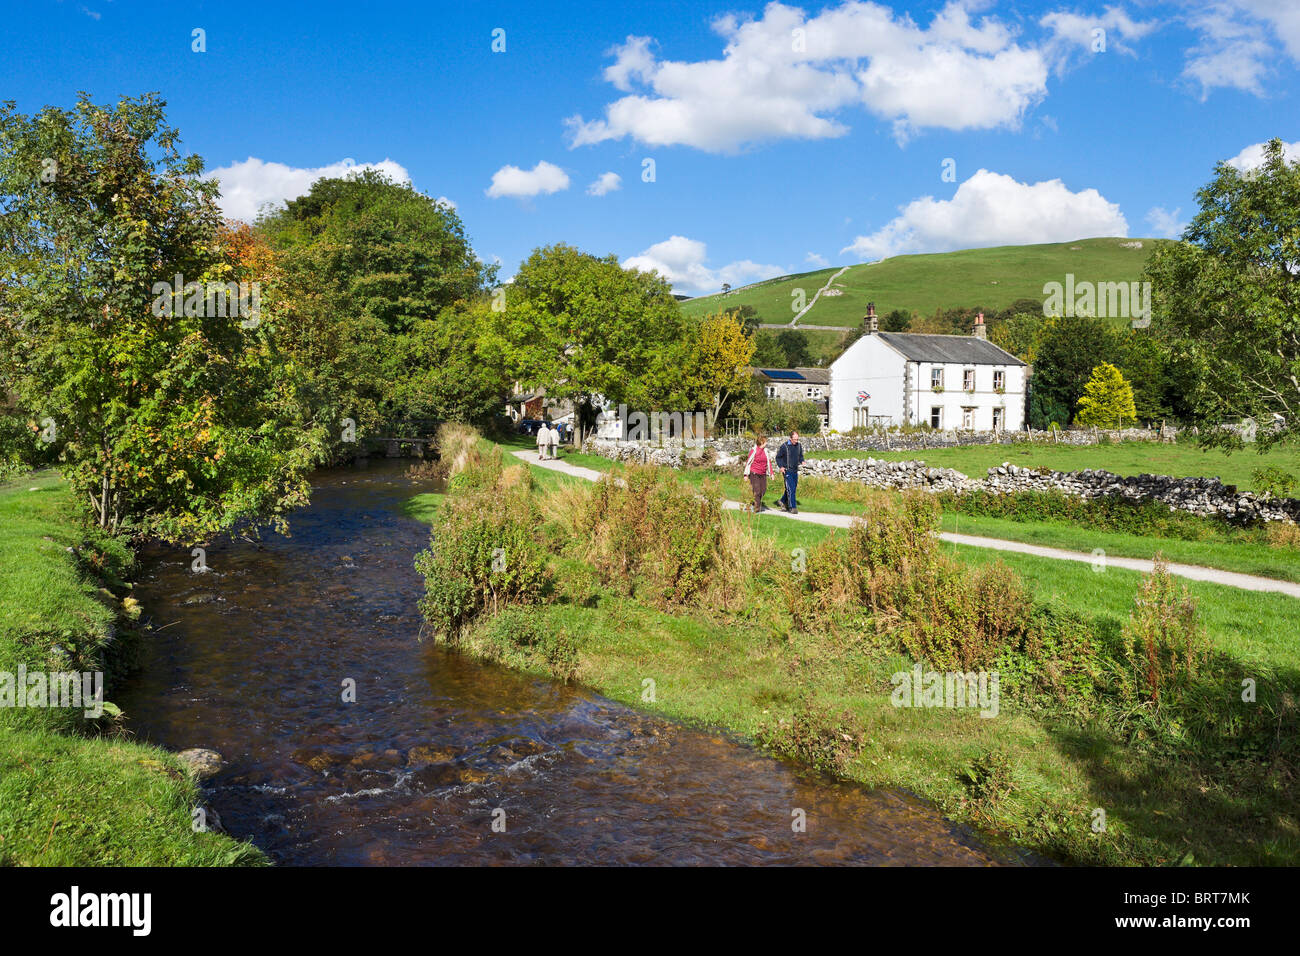 Malham Beck in the village of Malham, Wharfedale, Yorkshire Dales National Park, England, UK Stock Photo